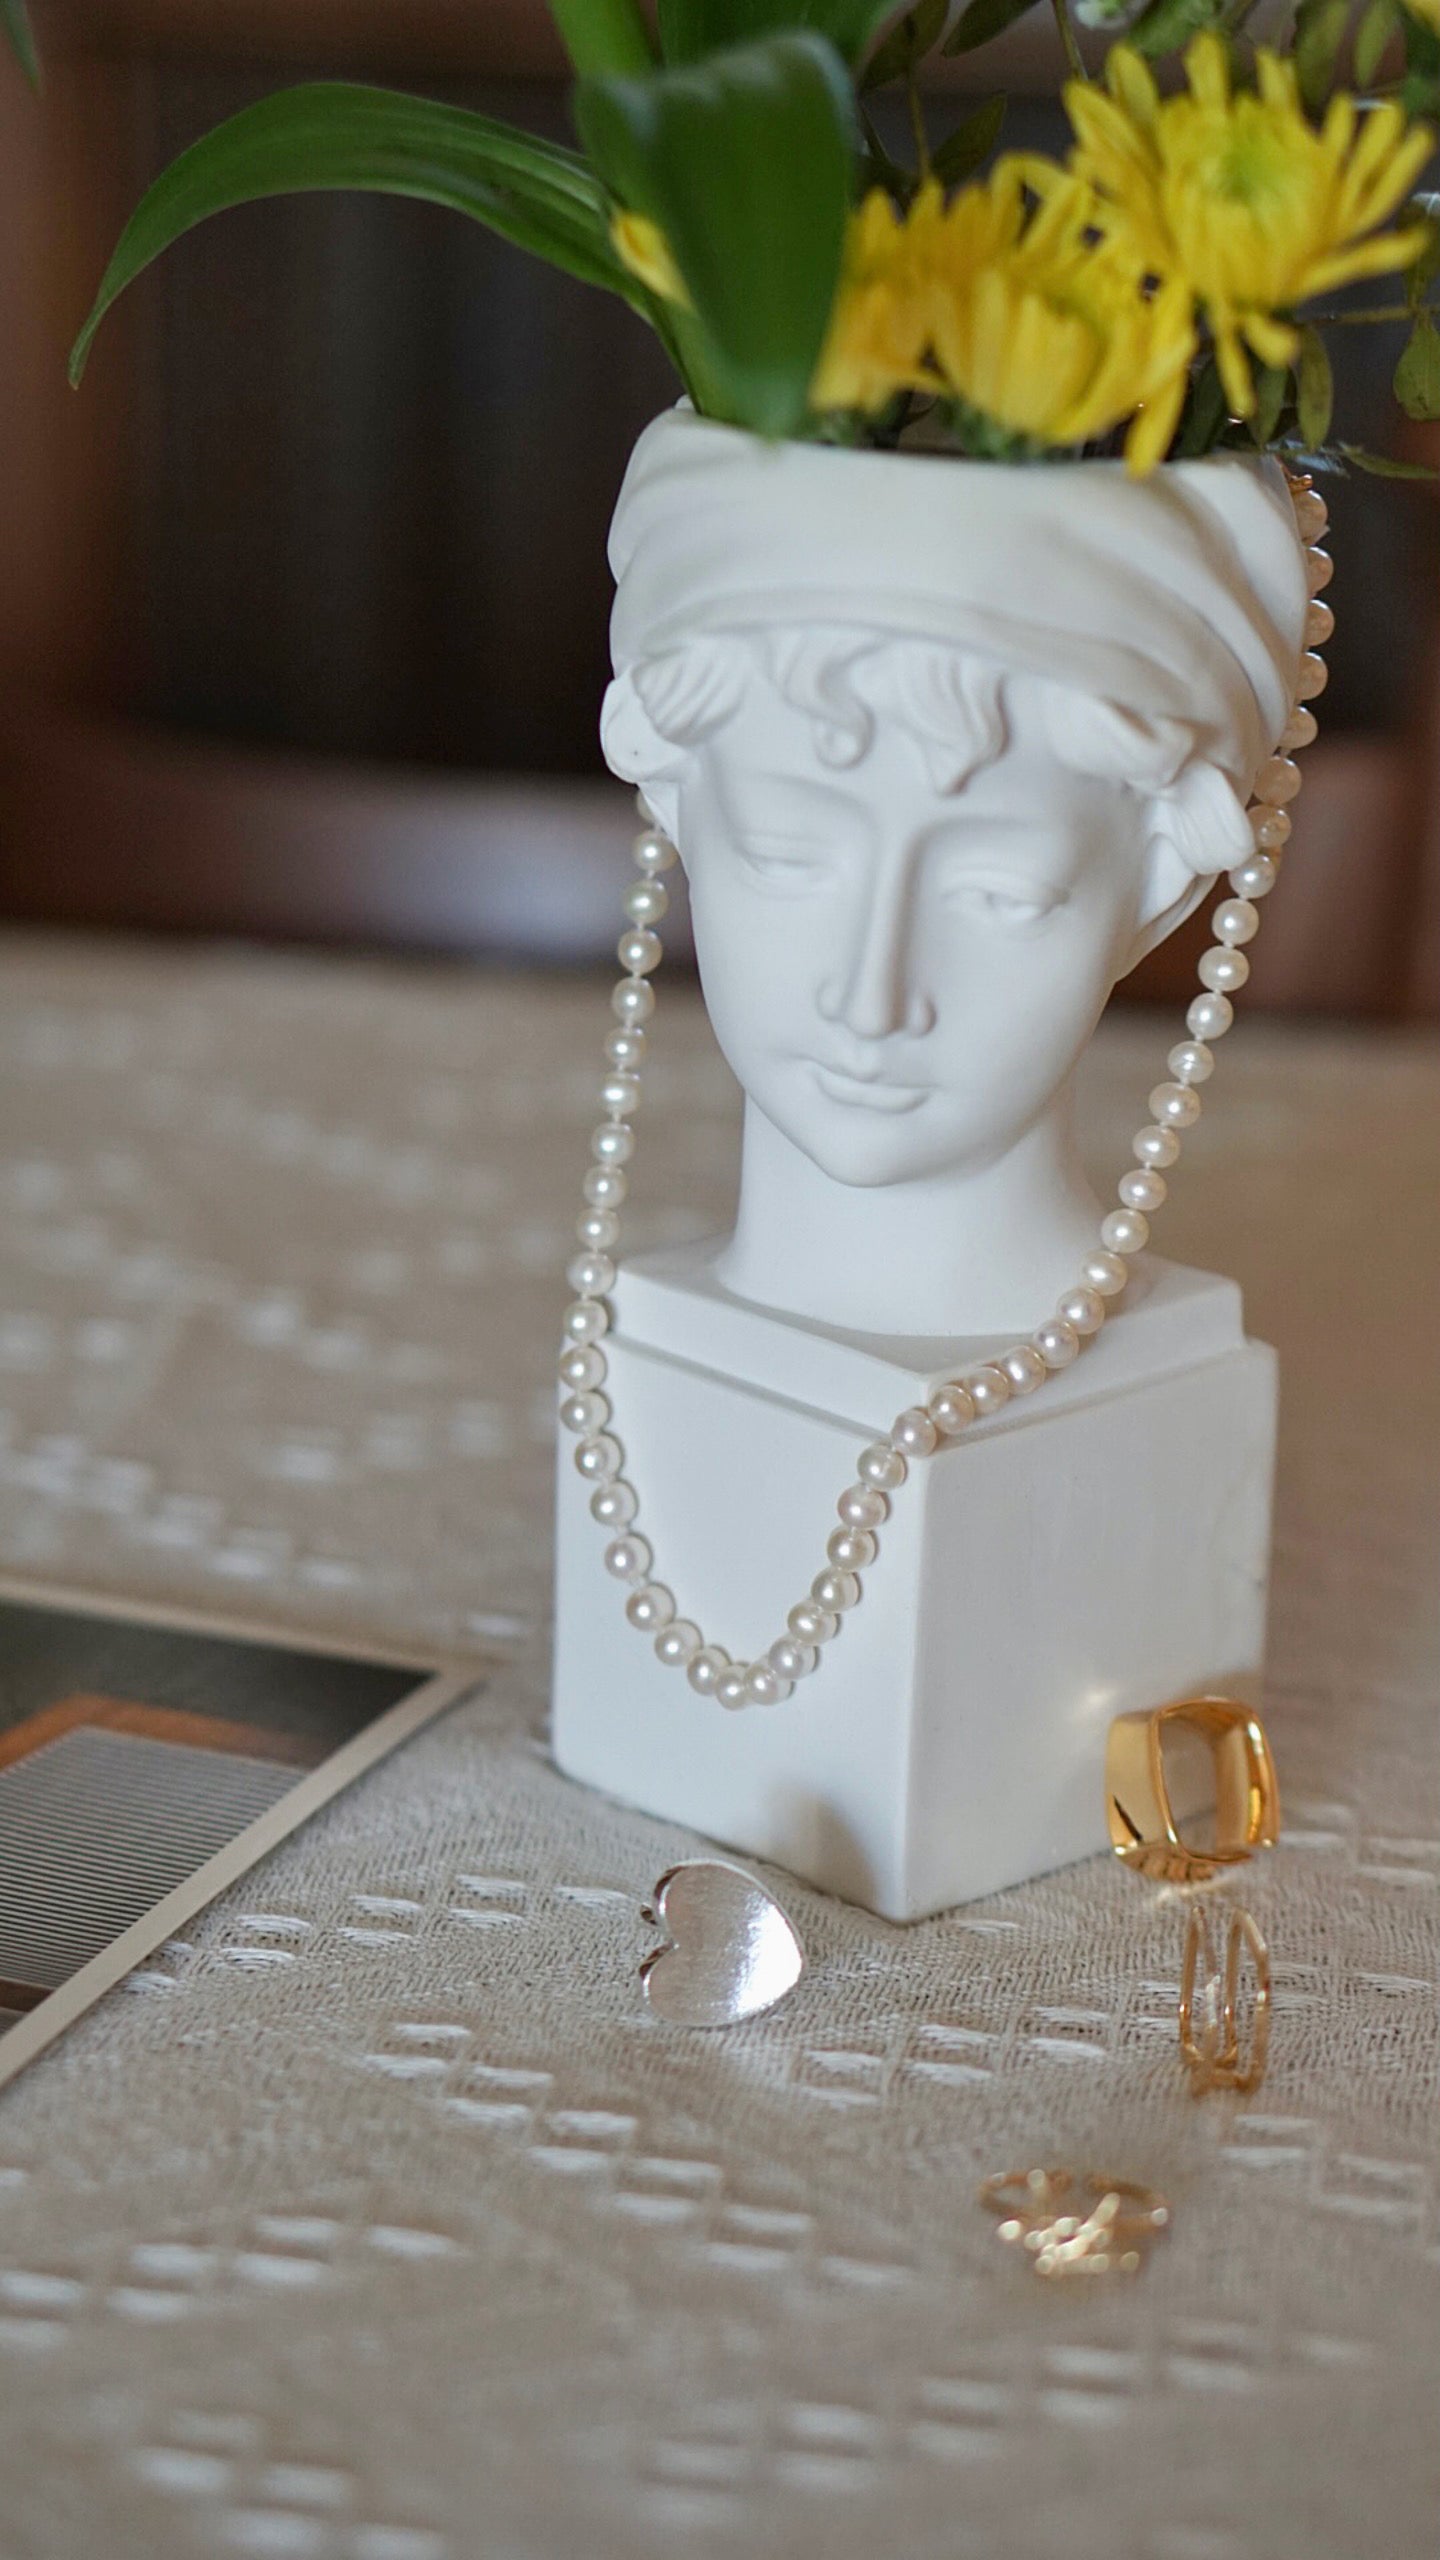 High-Grade Round Pearl Necklace